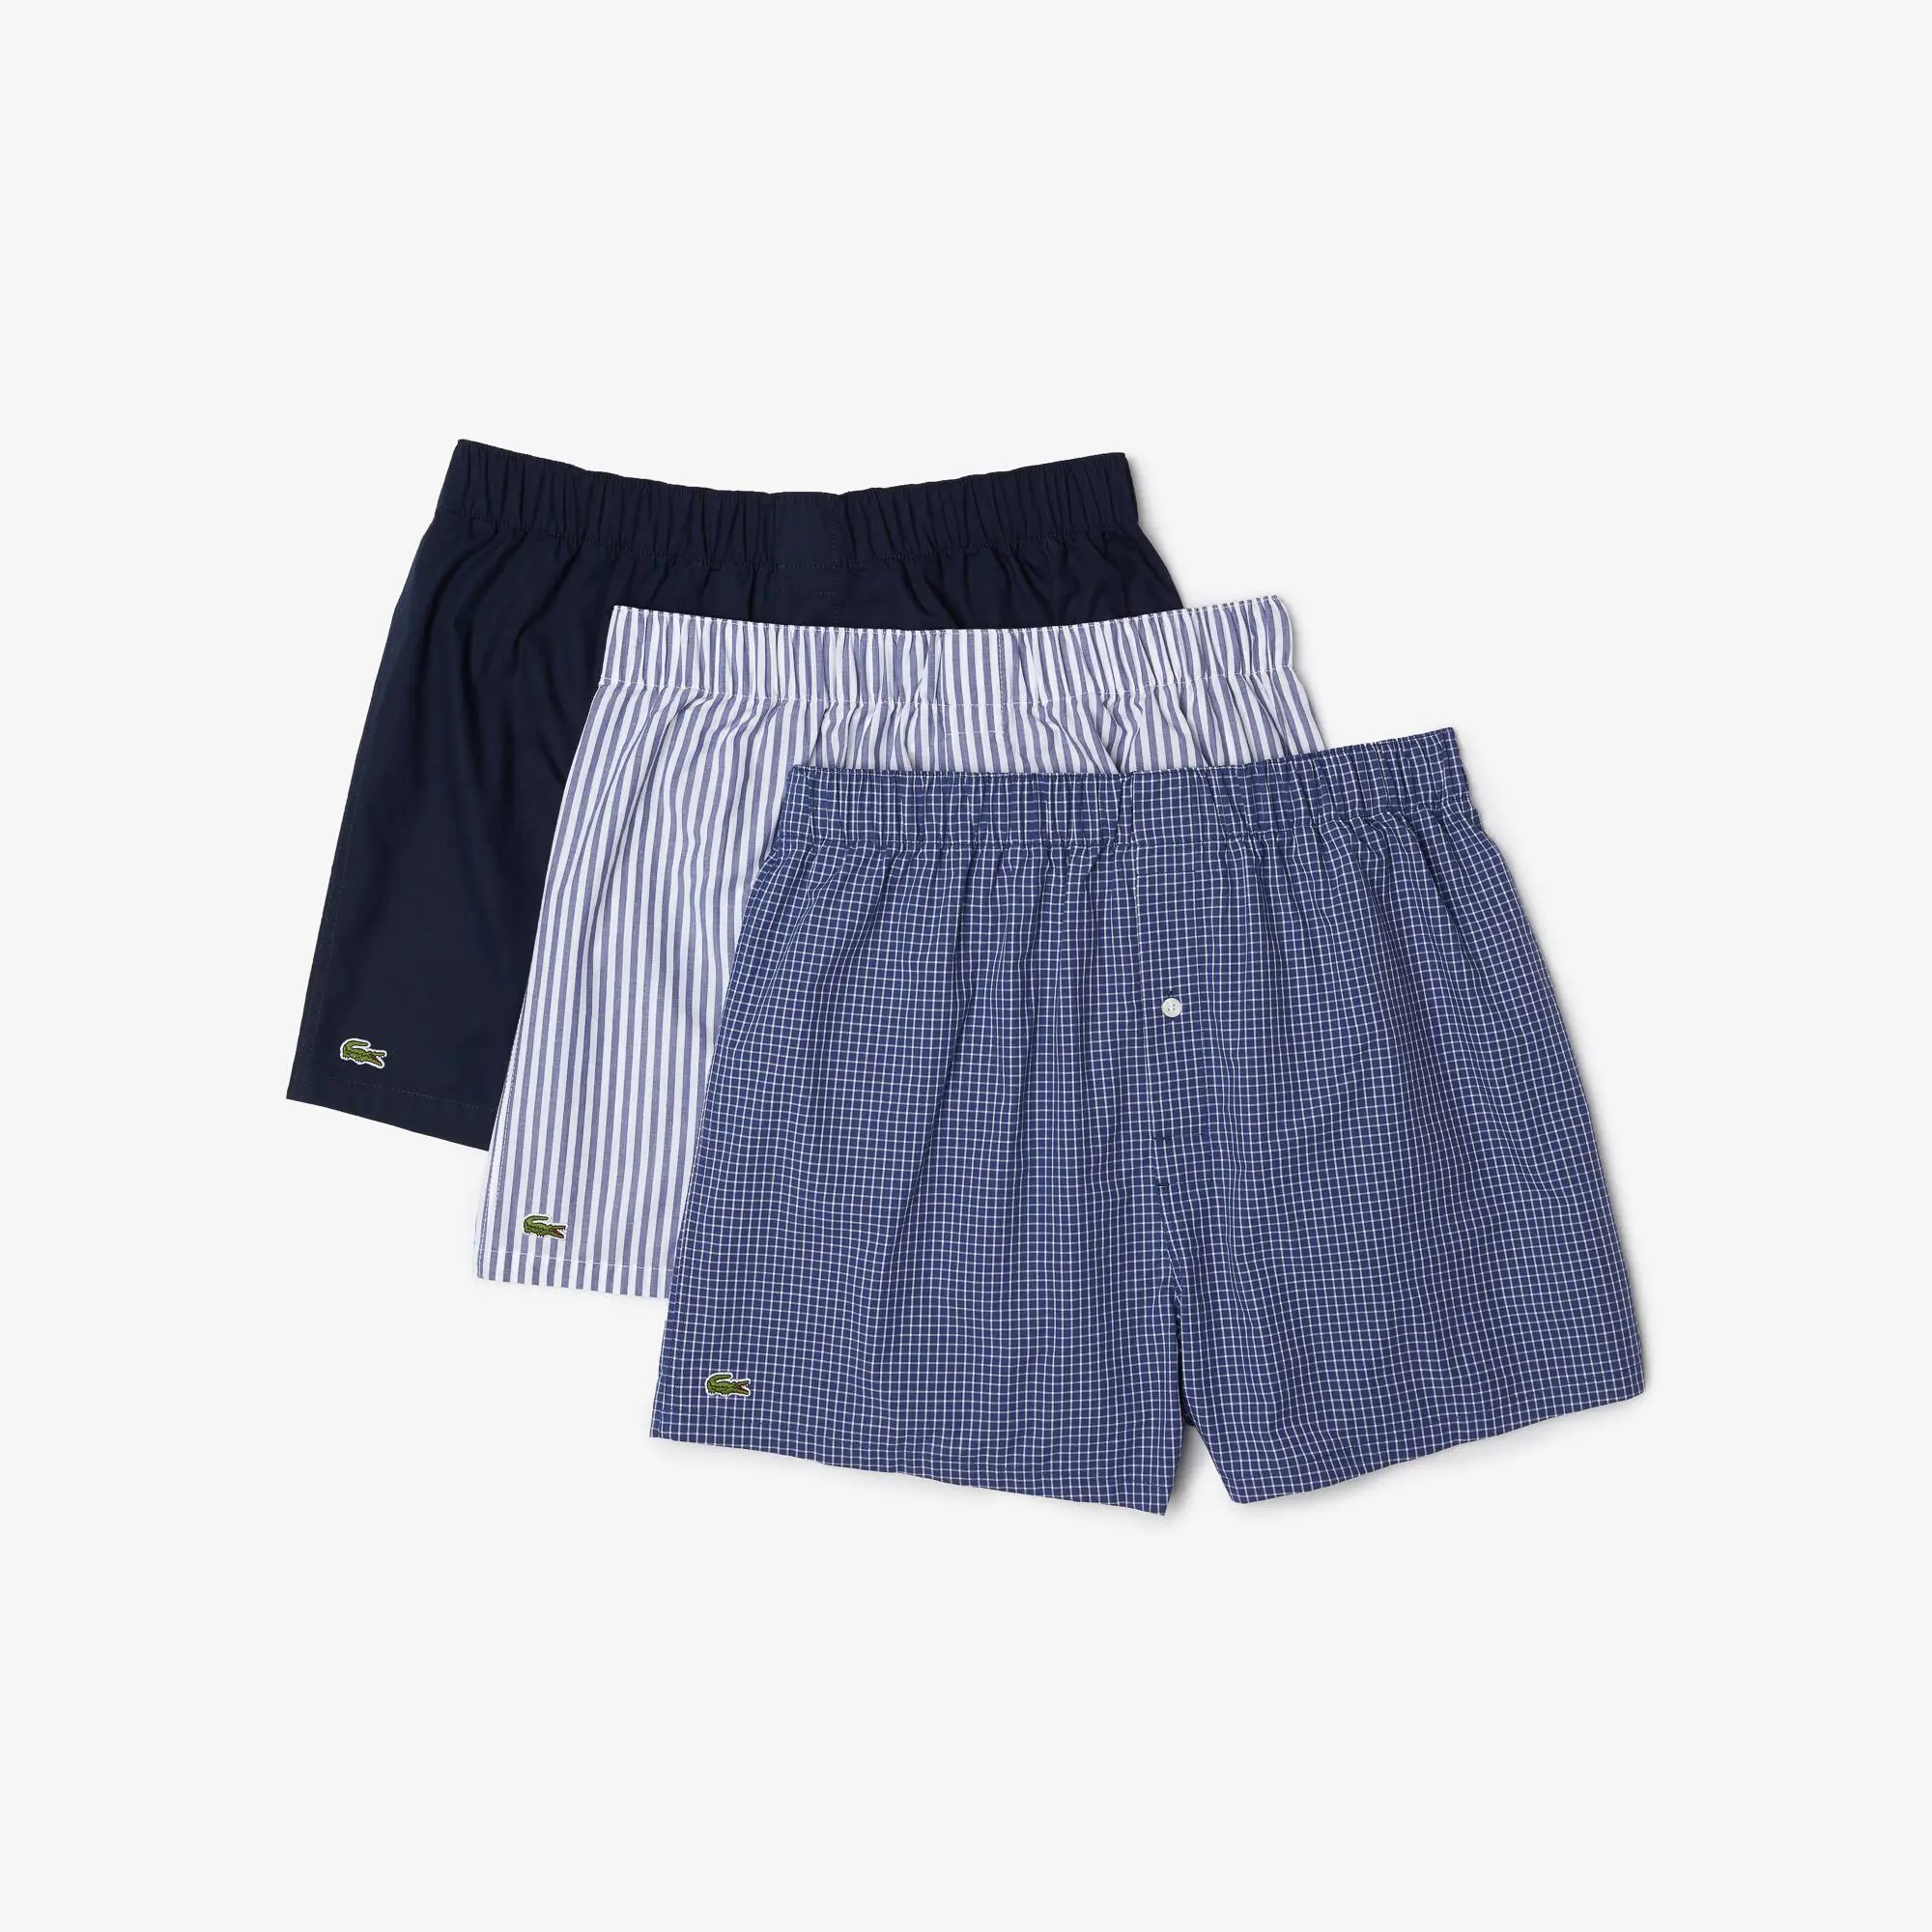 Lacoste Men's 3-Pack Striped Boxers. 2